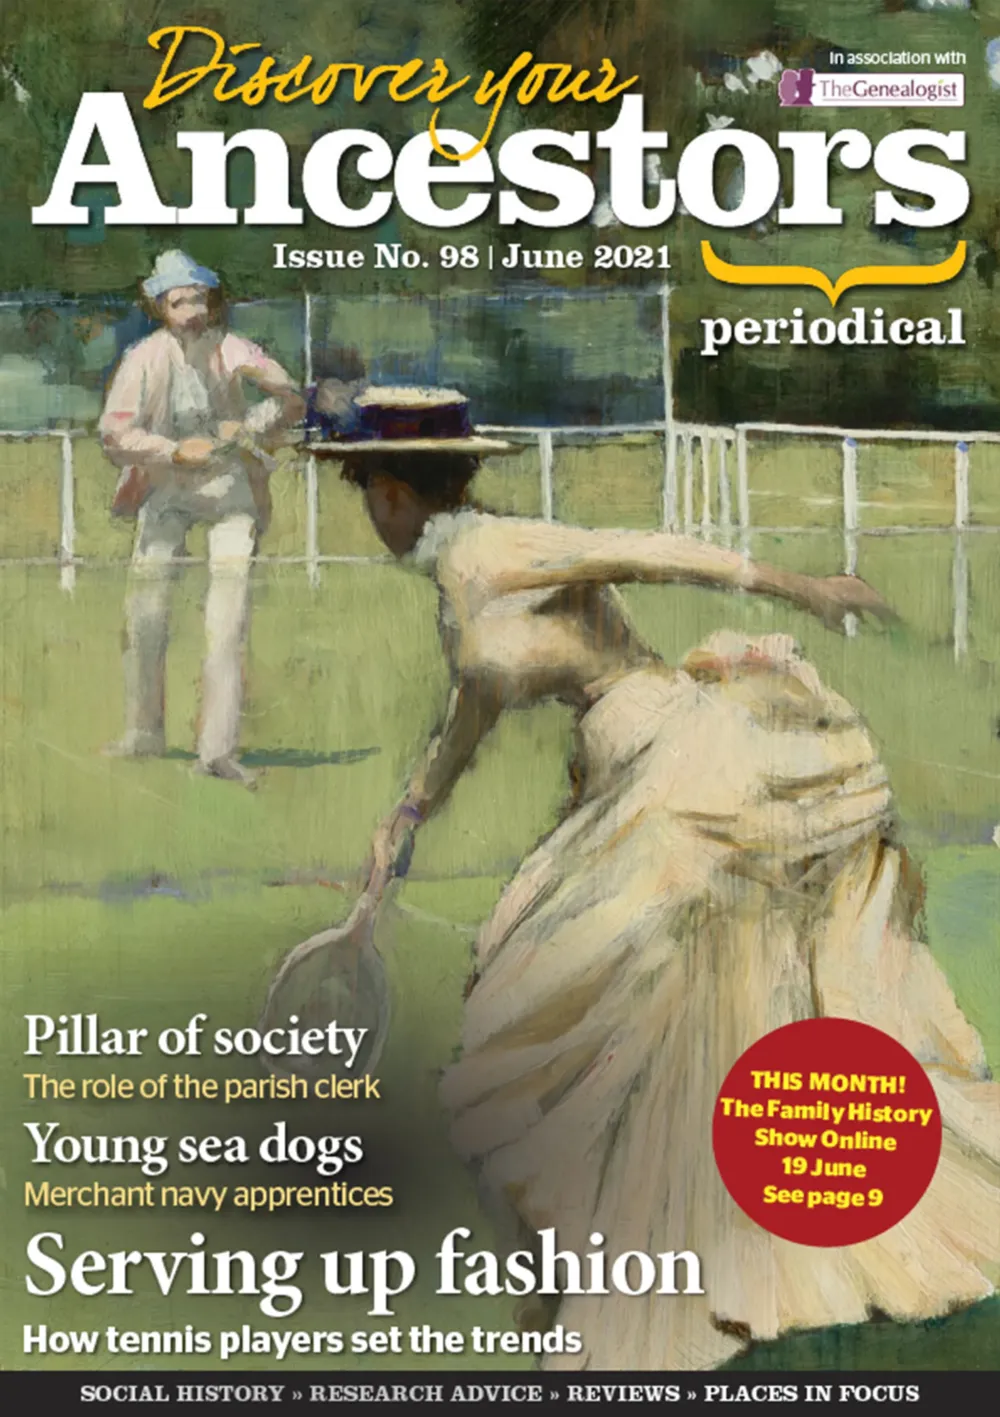 Discover Your Ancestors Periodical - June 2021